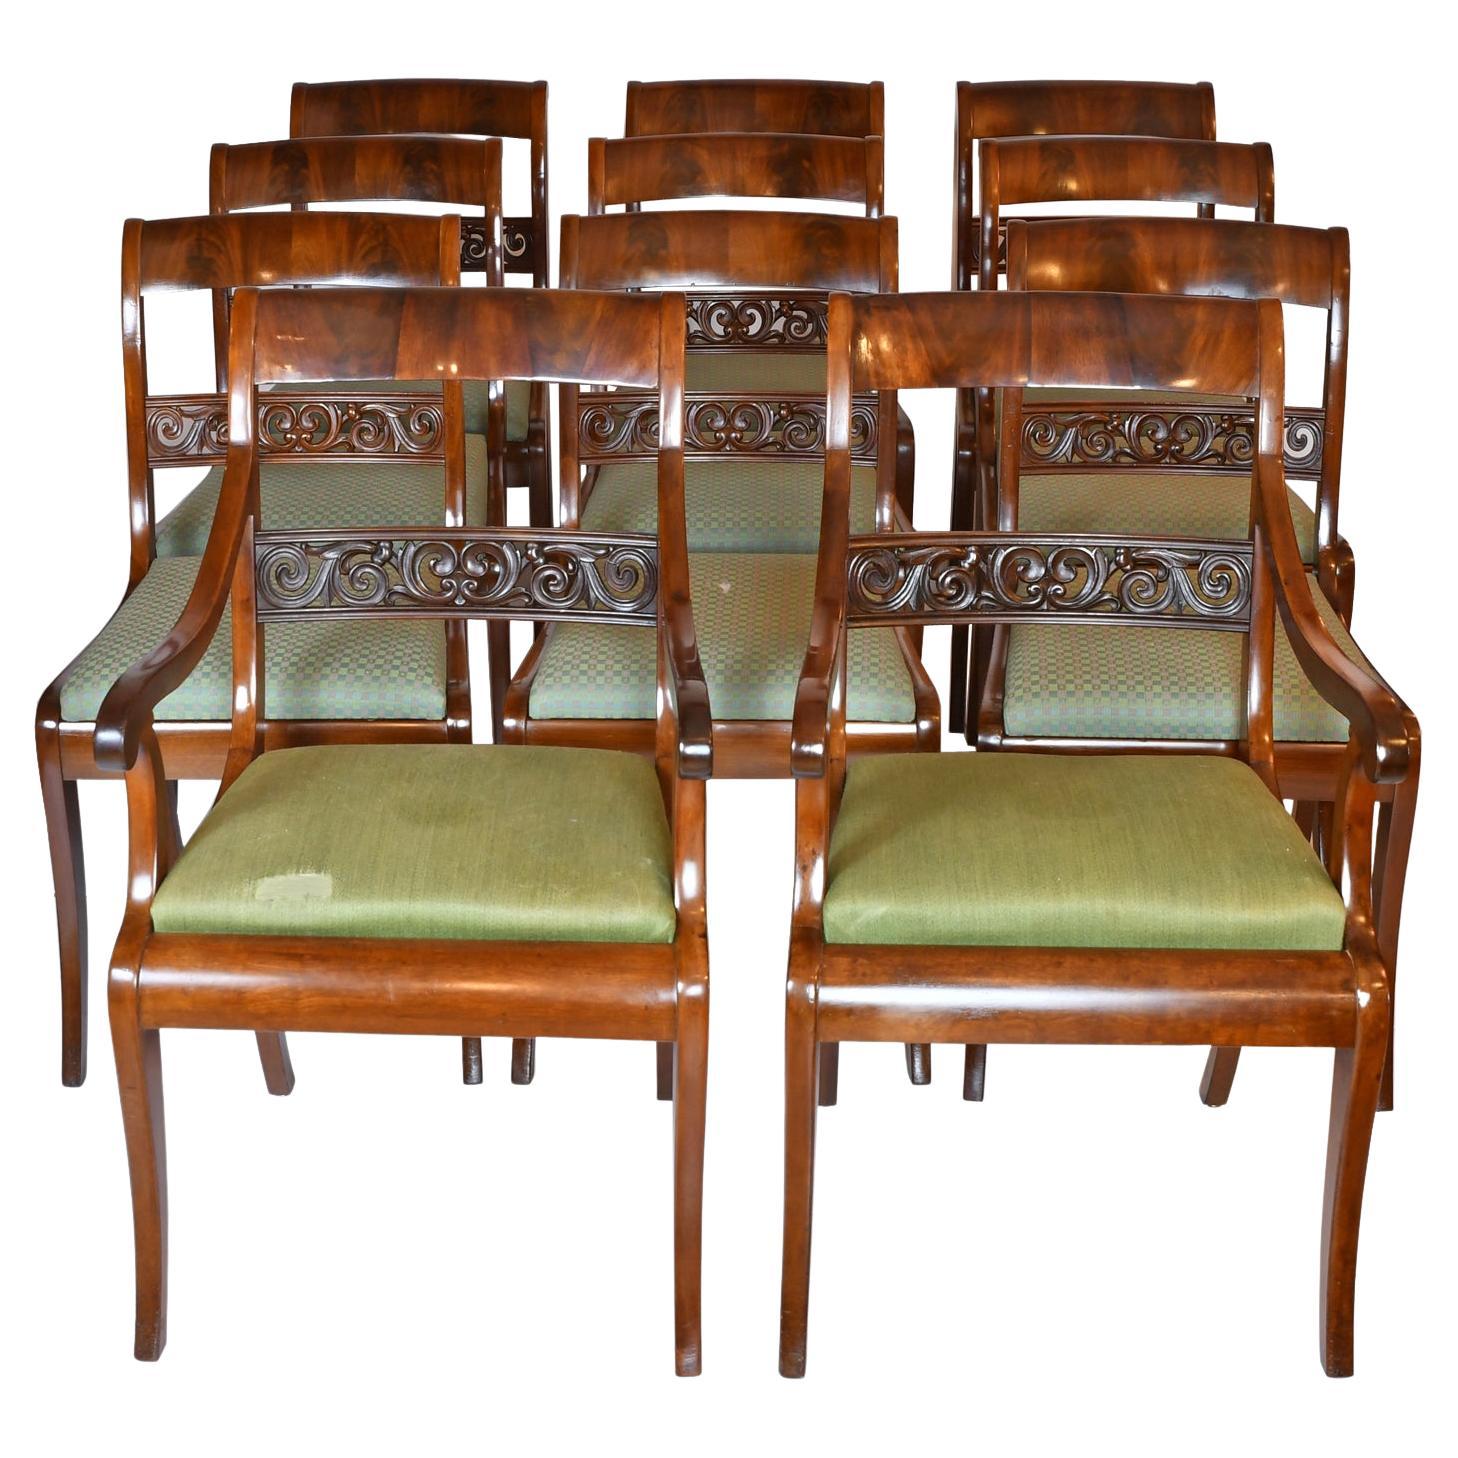 Set of 11 Antique Dining Chairs with 9 Sides & 2 Arms in West Indies Mahogany For Sale